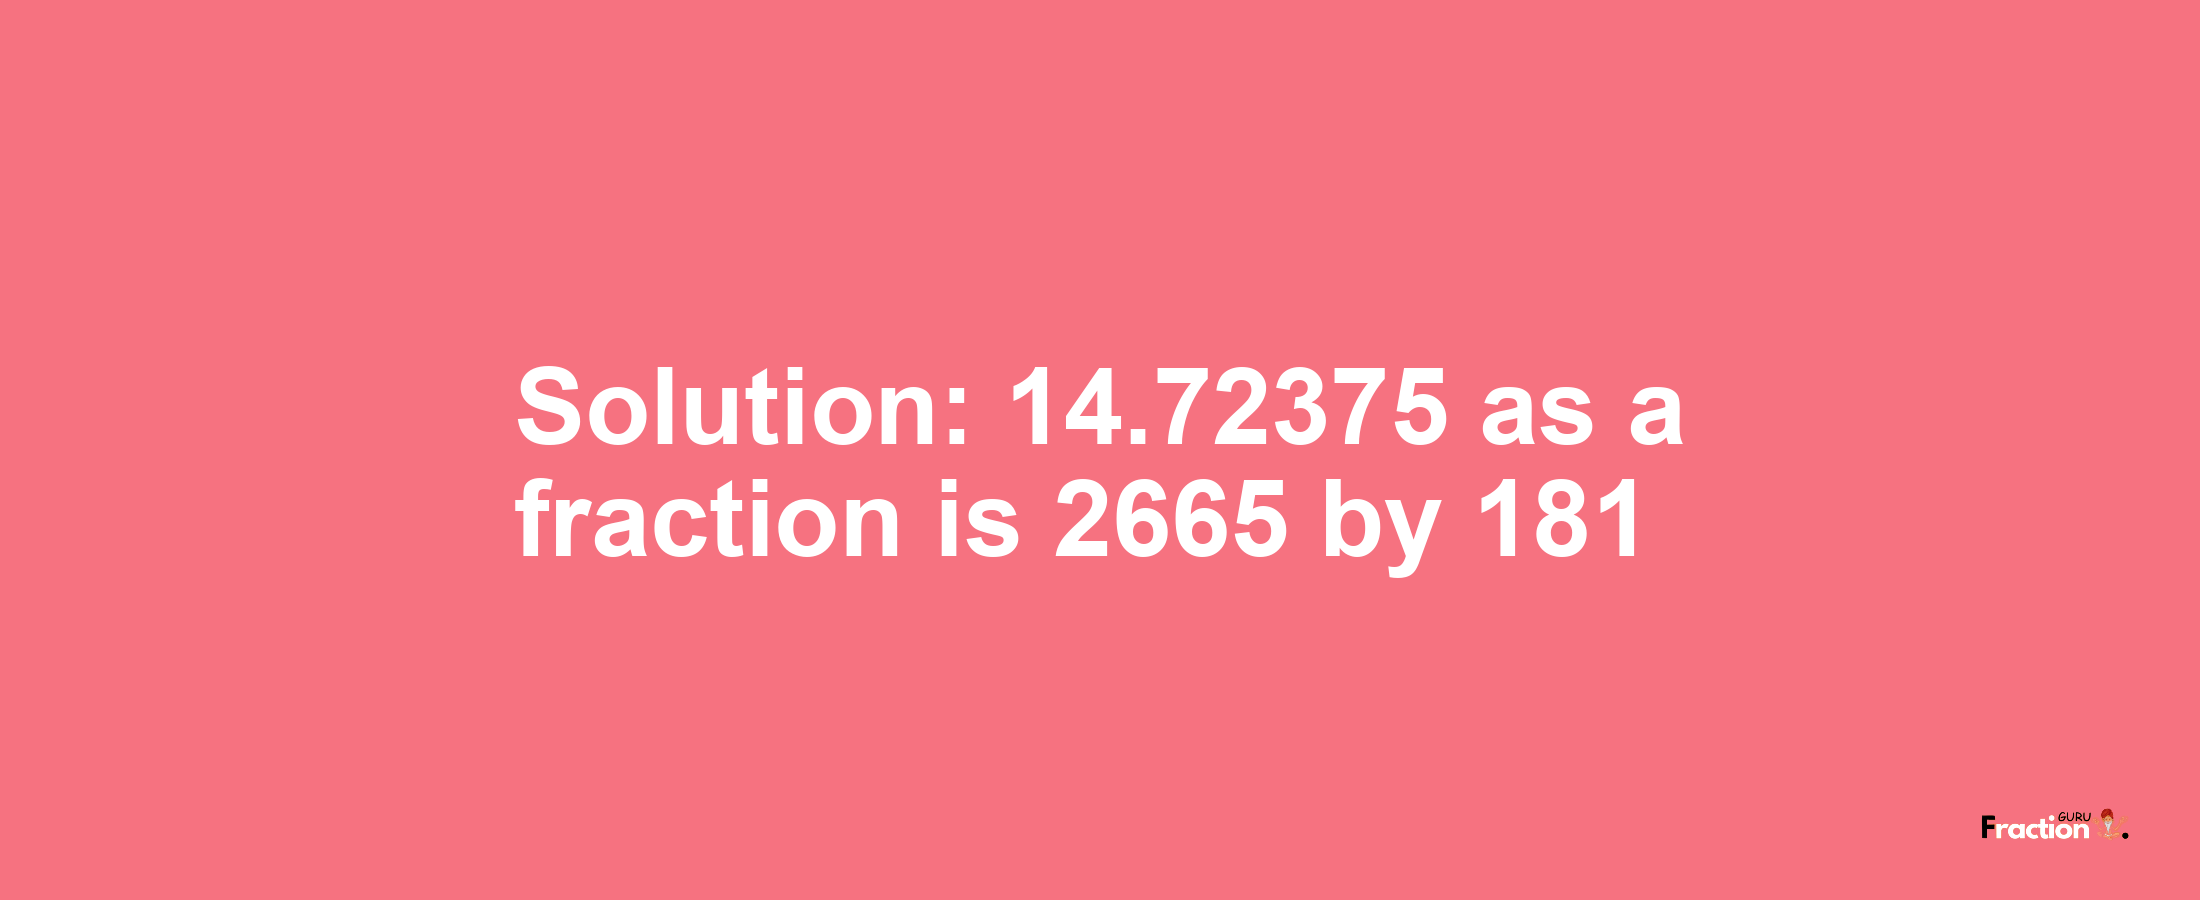 Solution:14.72375 as a fraction is 2665/181